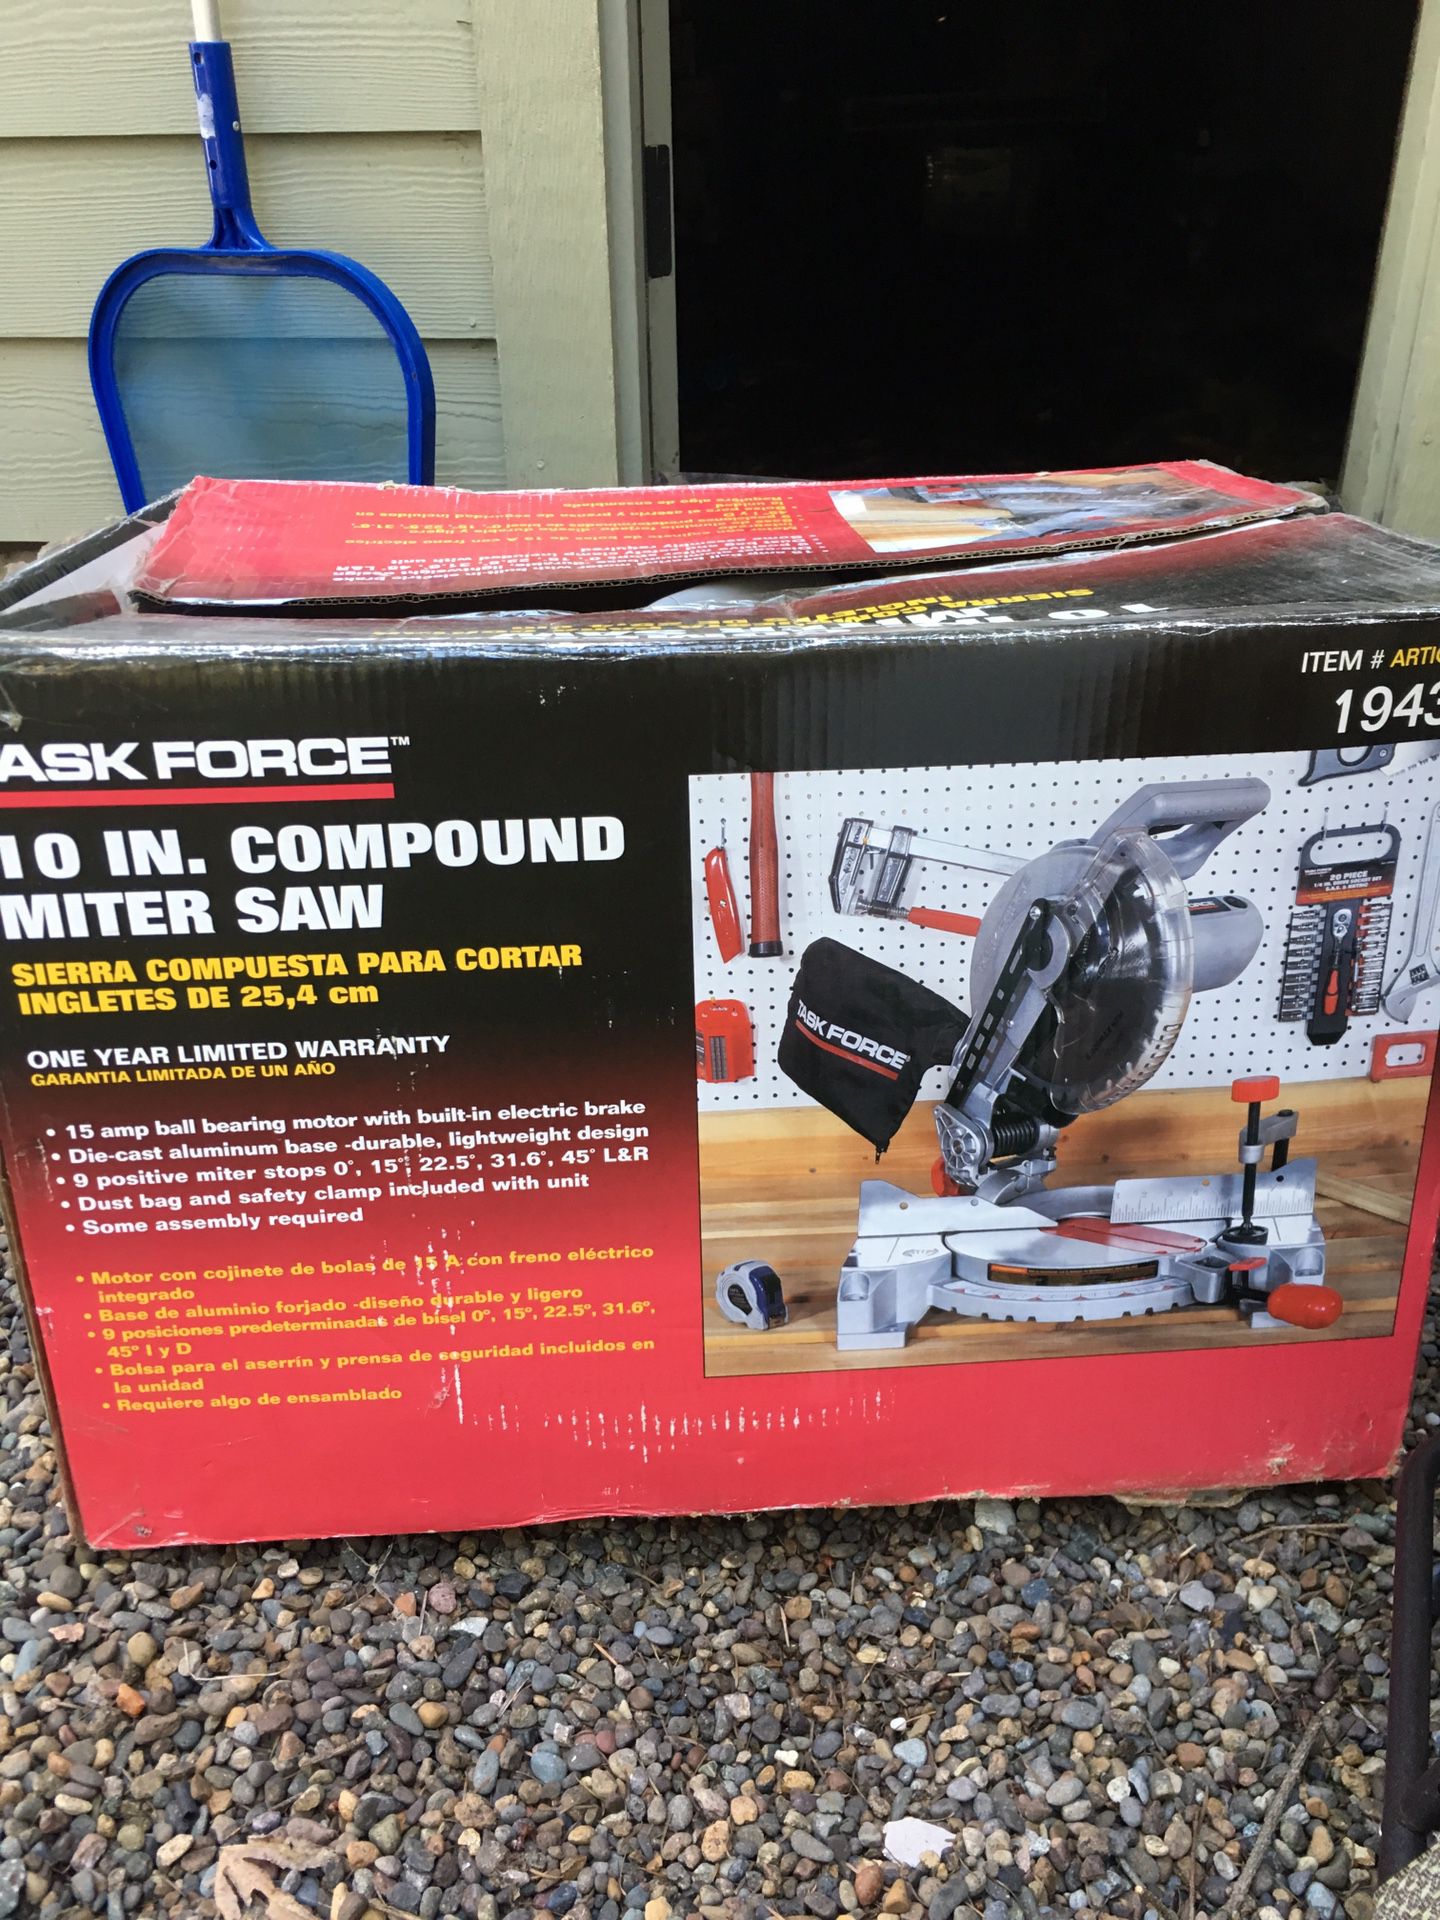 Task force 10 in compound miter saw